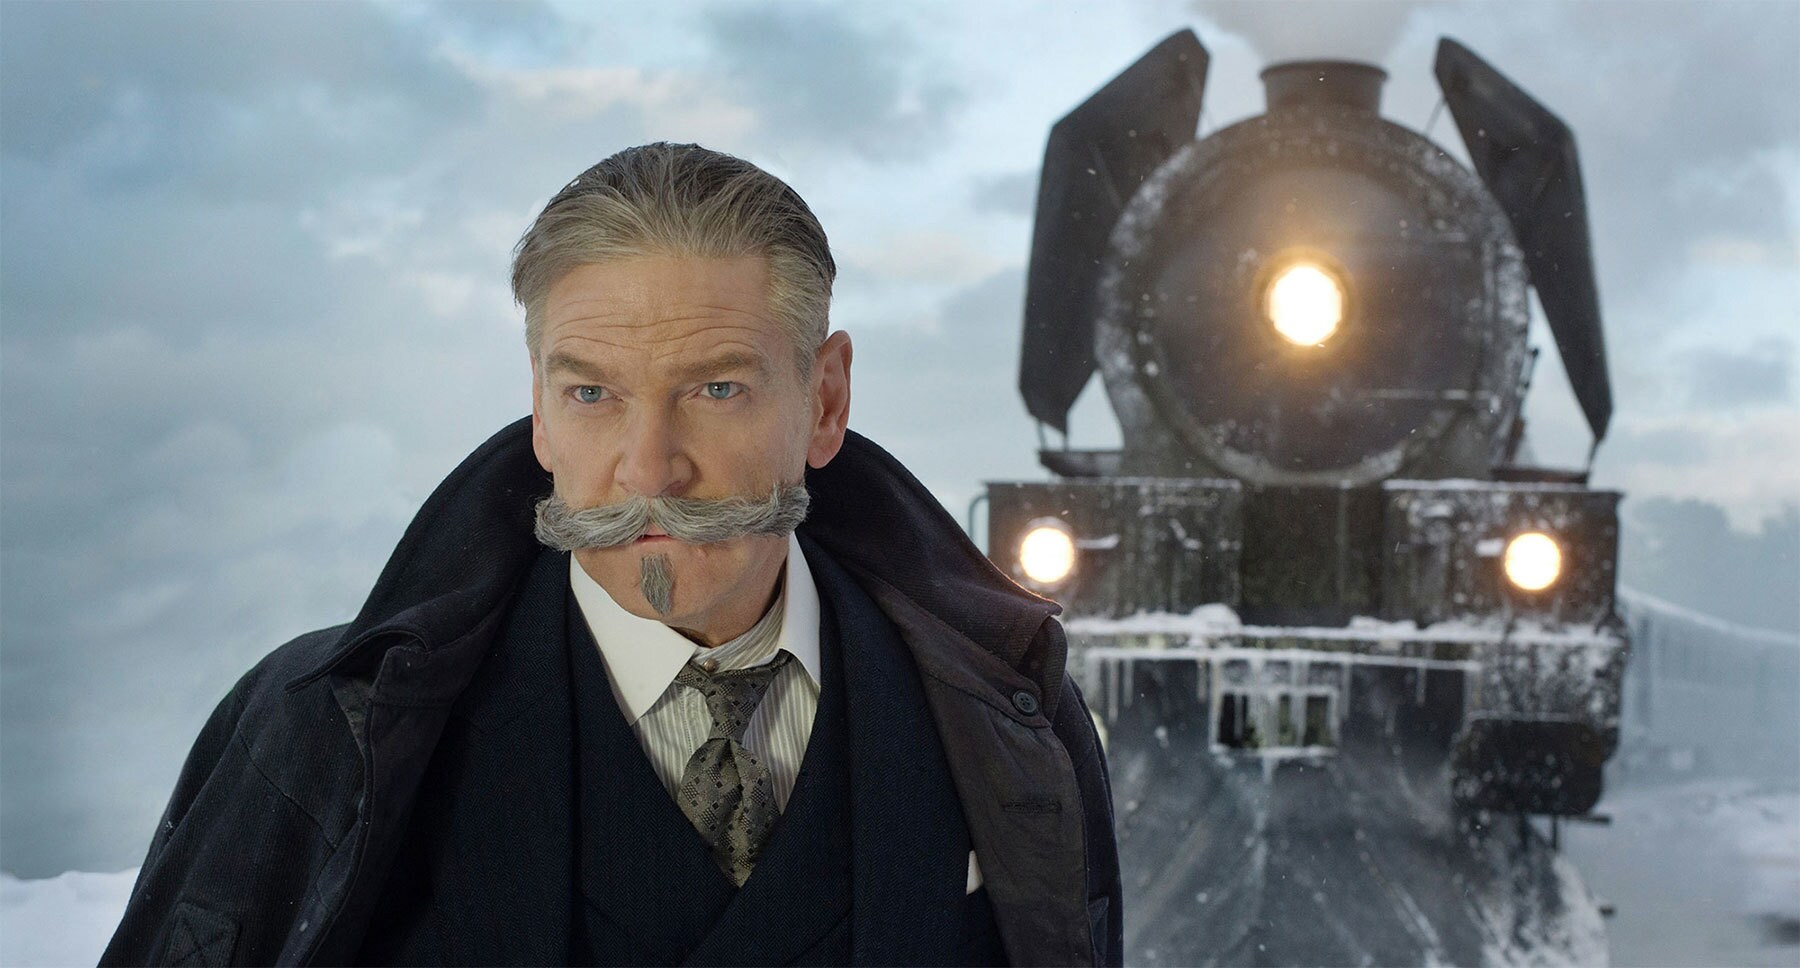 Kenneth Branagh (as Hercule Poirot) standing next to a train in "Murder on the Orient Express"